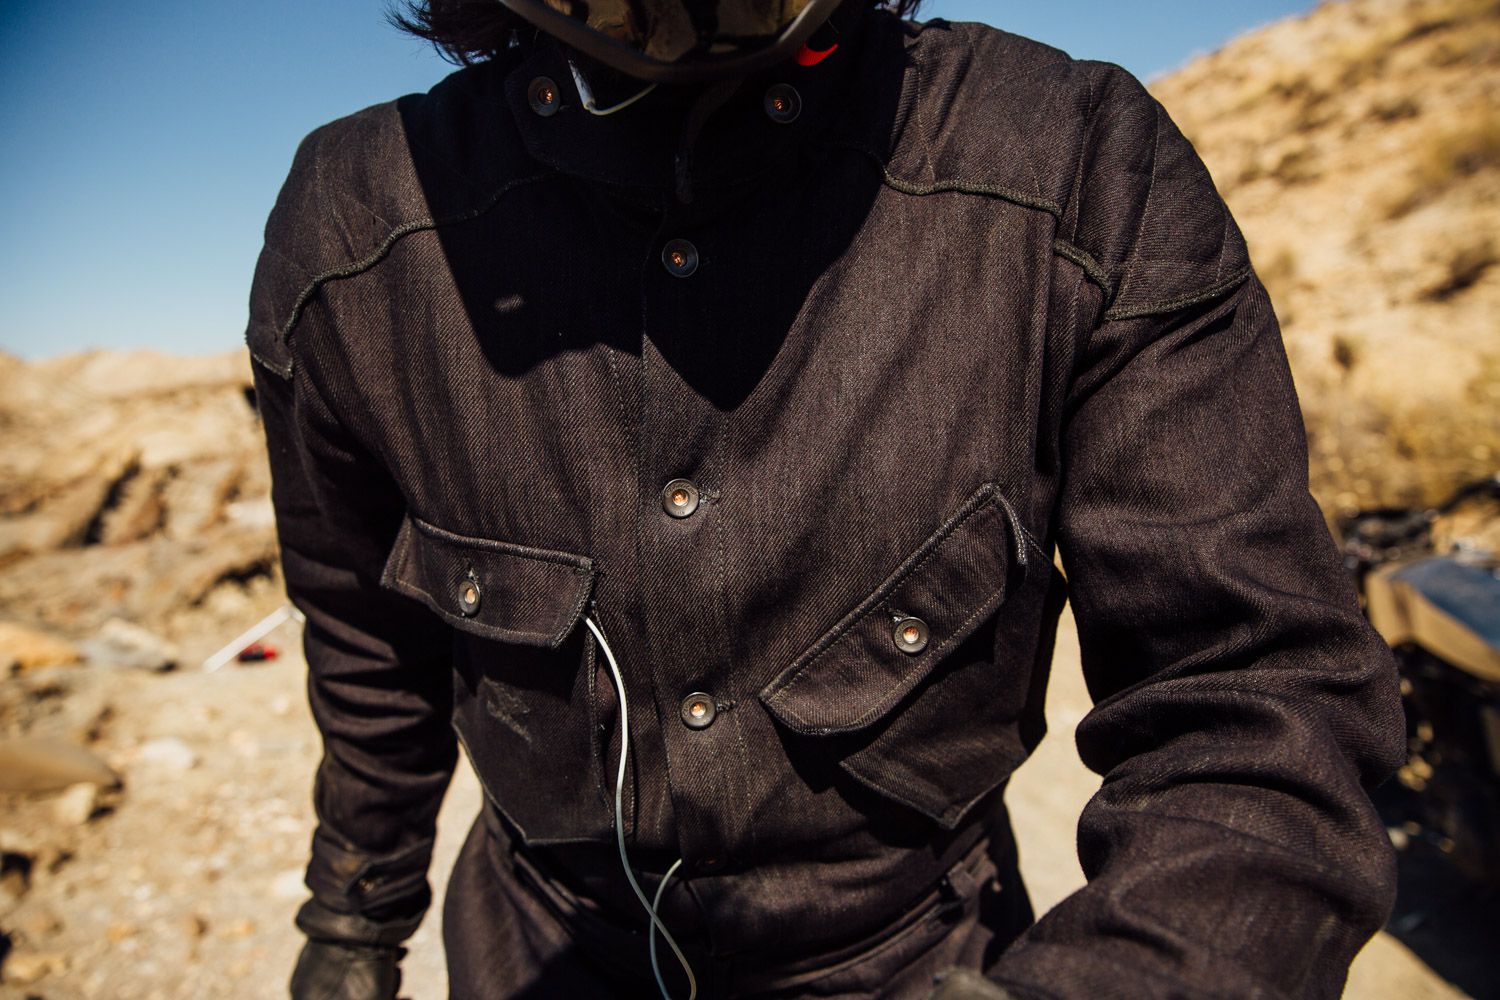 Dyneema® Denim Could Change The Future Of Motorcycle Gear